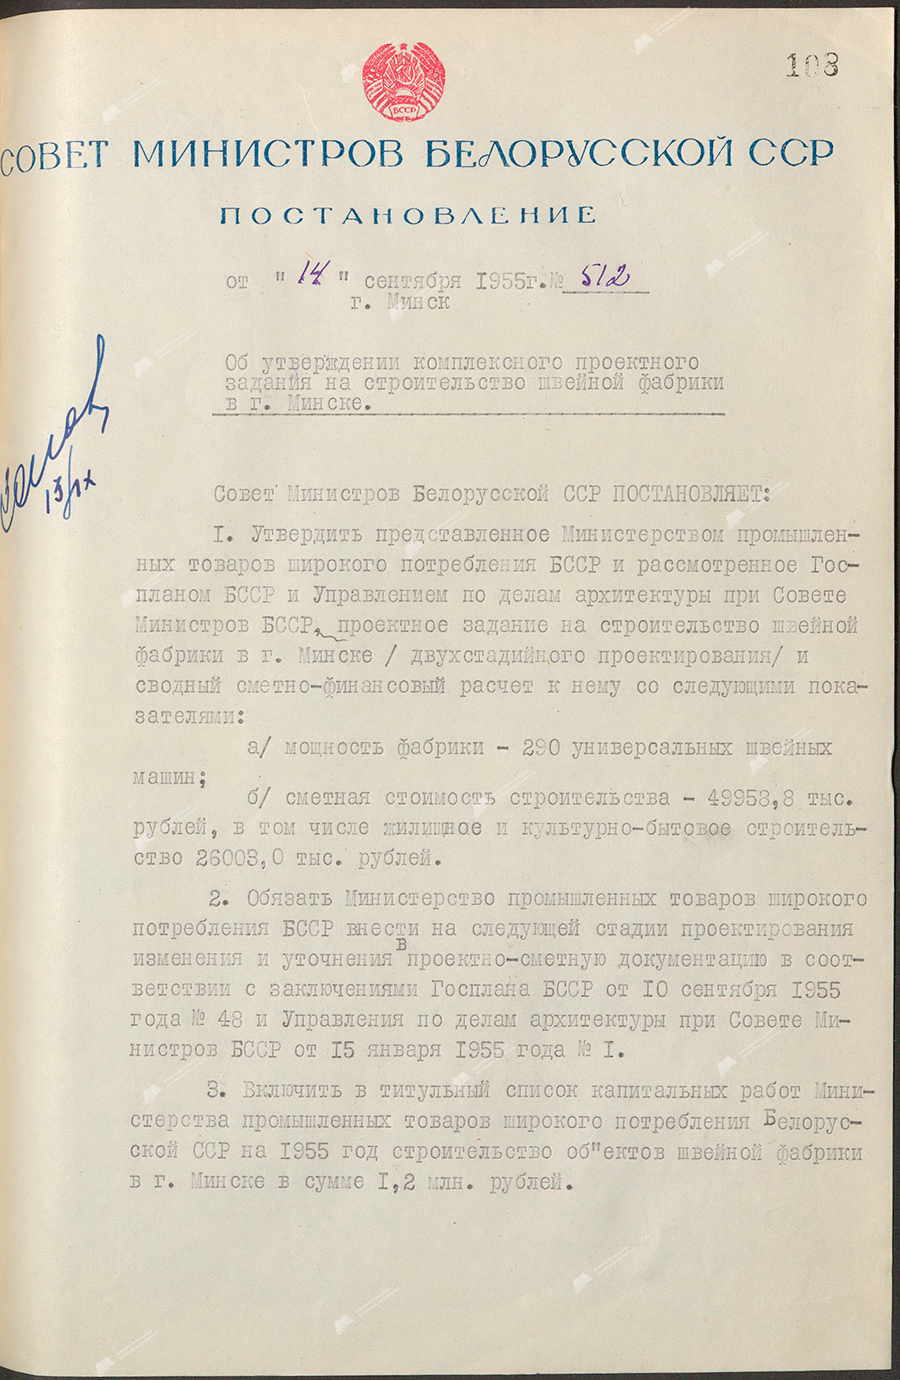 Resolution No. 512 of the Council of Ministers of the Byelorussian SSR «On approval of a comprehensive design assignment for the construction of a garment factory in Minsk»-с. 0